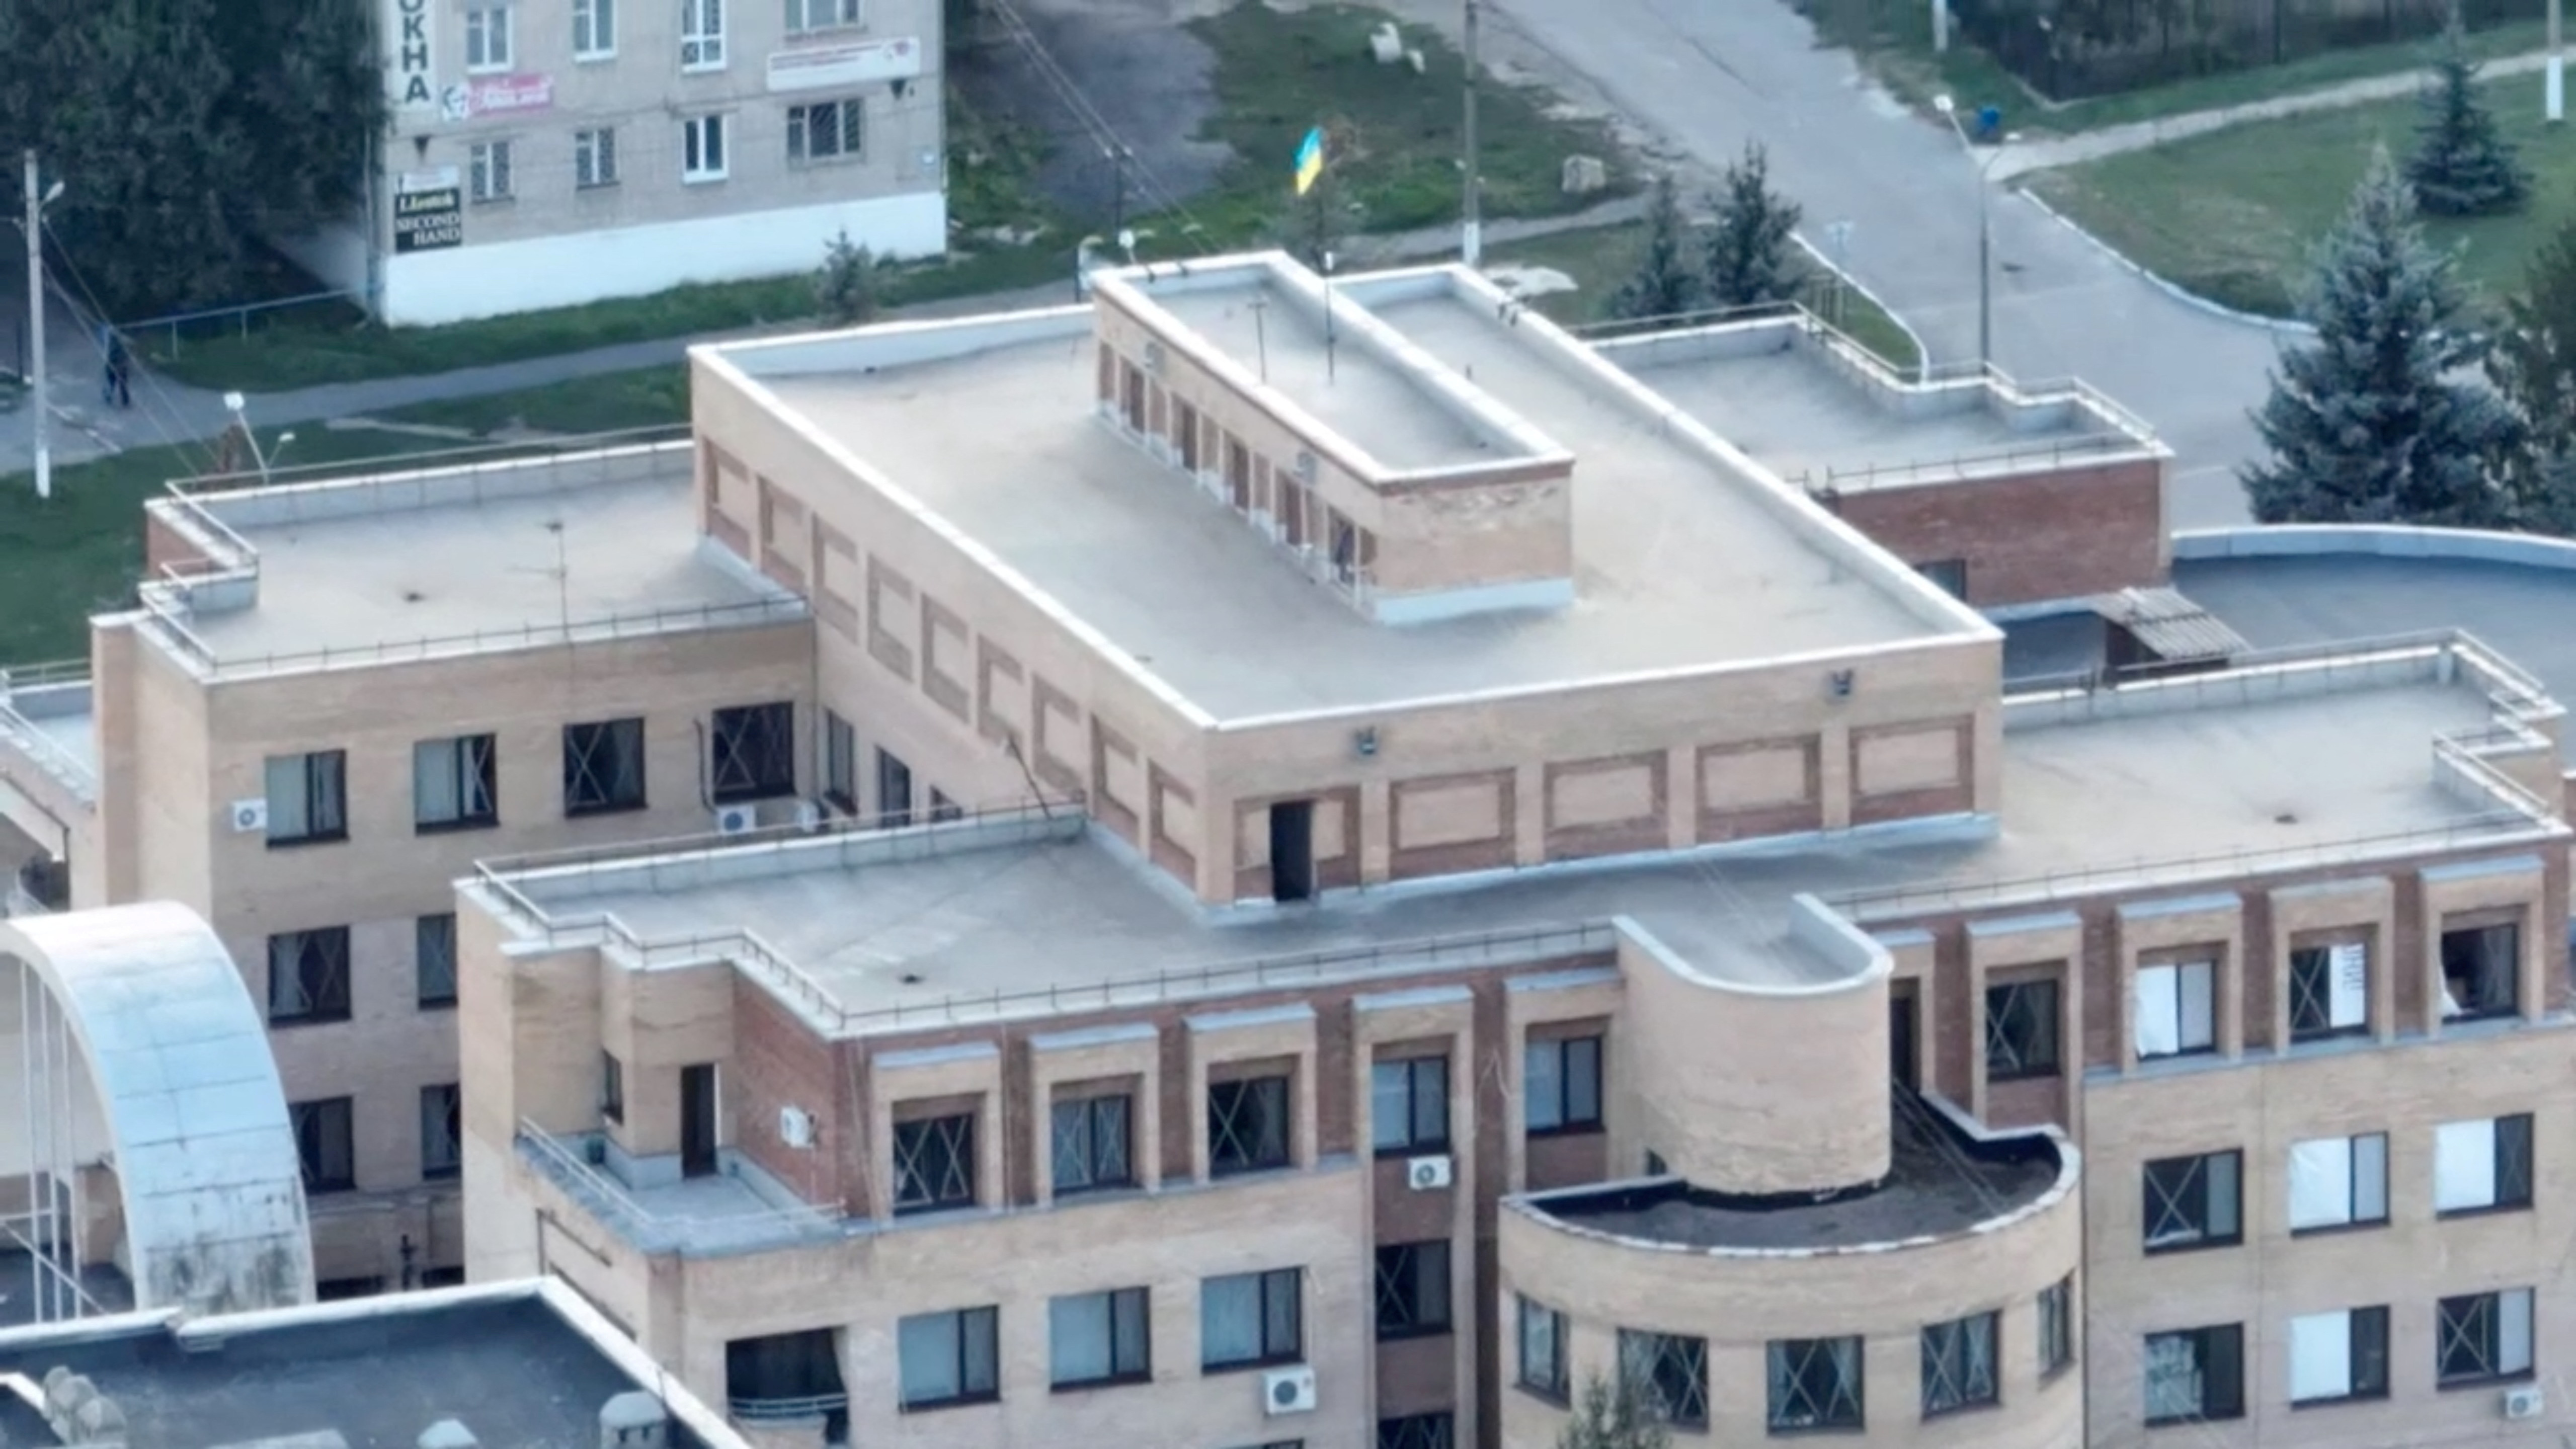 Drone footage shows the Ukrainian flag on the City Council building in Balakliia